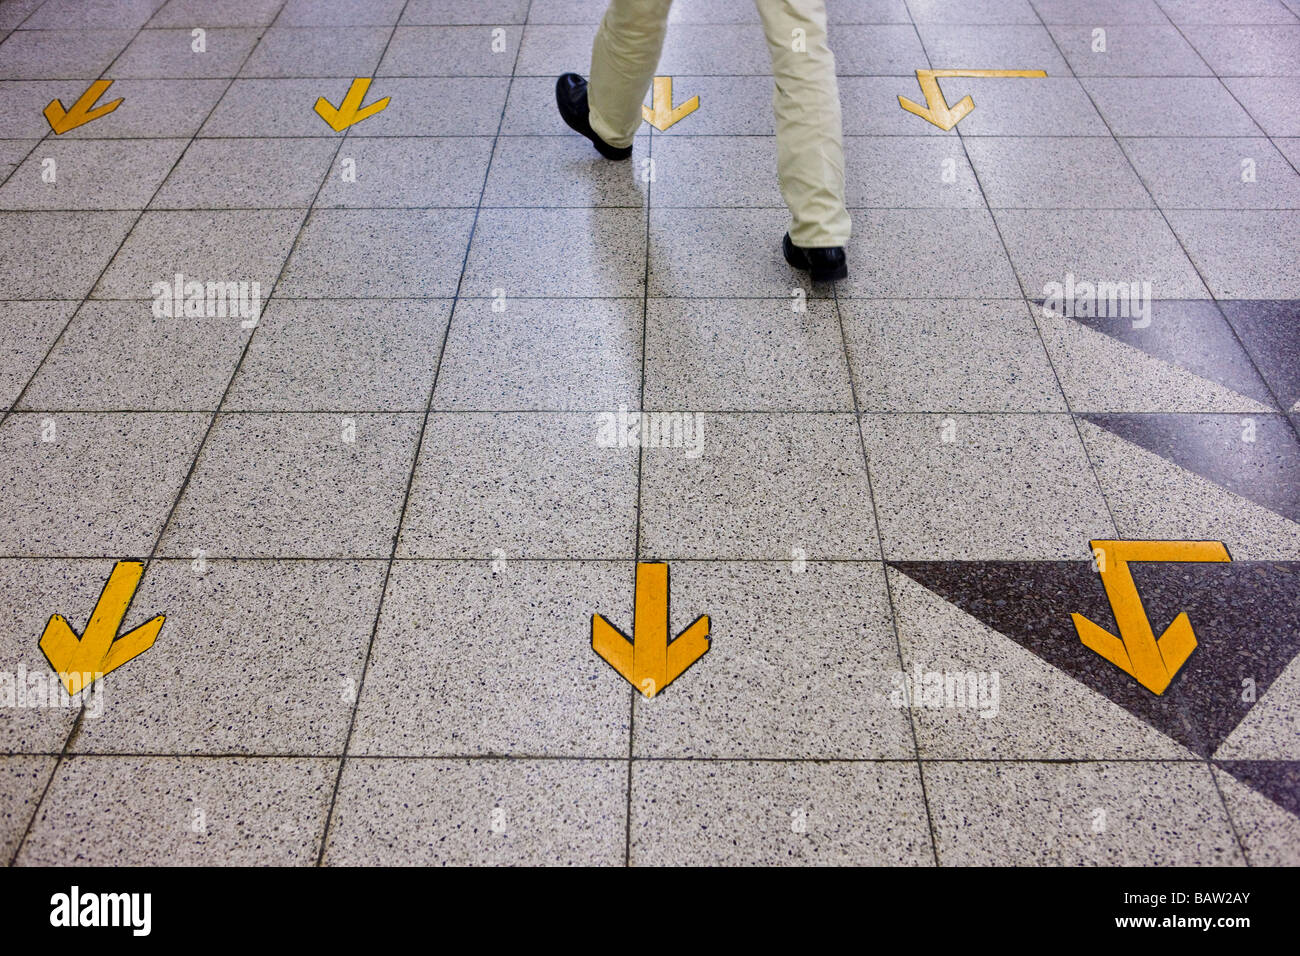 Yellow arrows on floor, walking against the stream Stock Photo